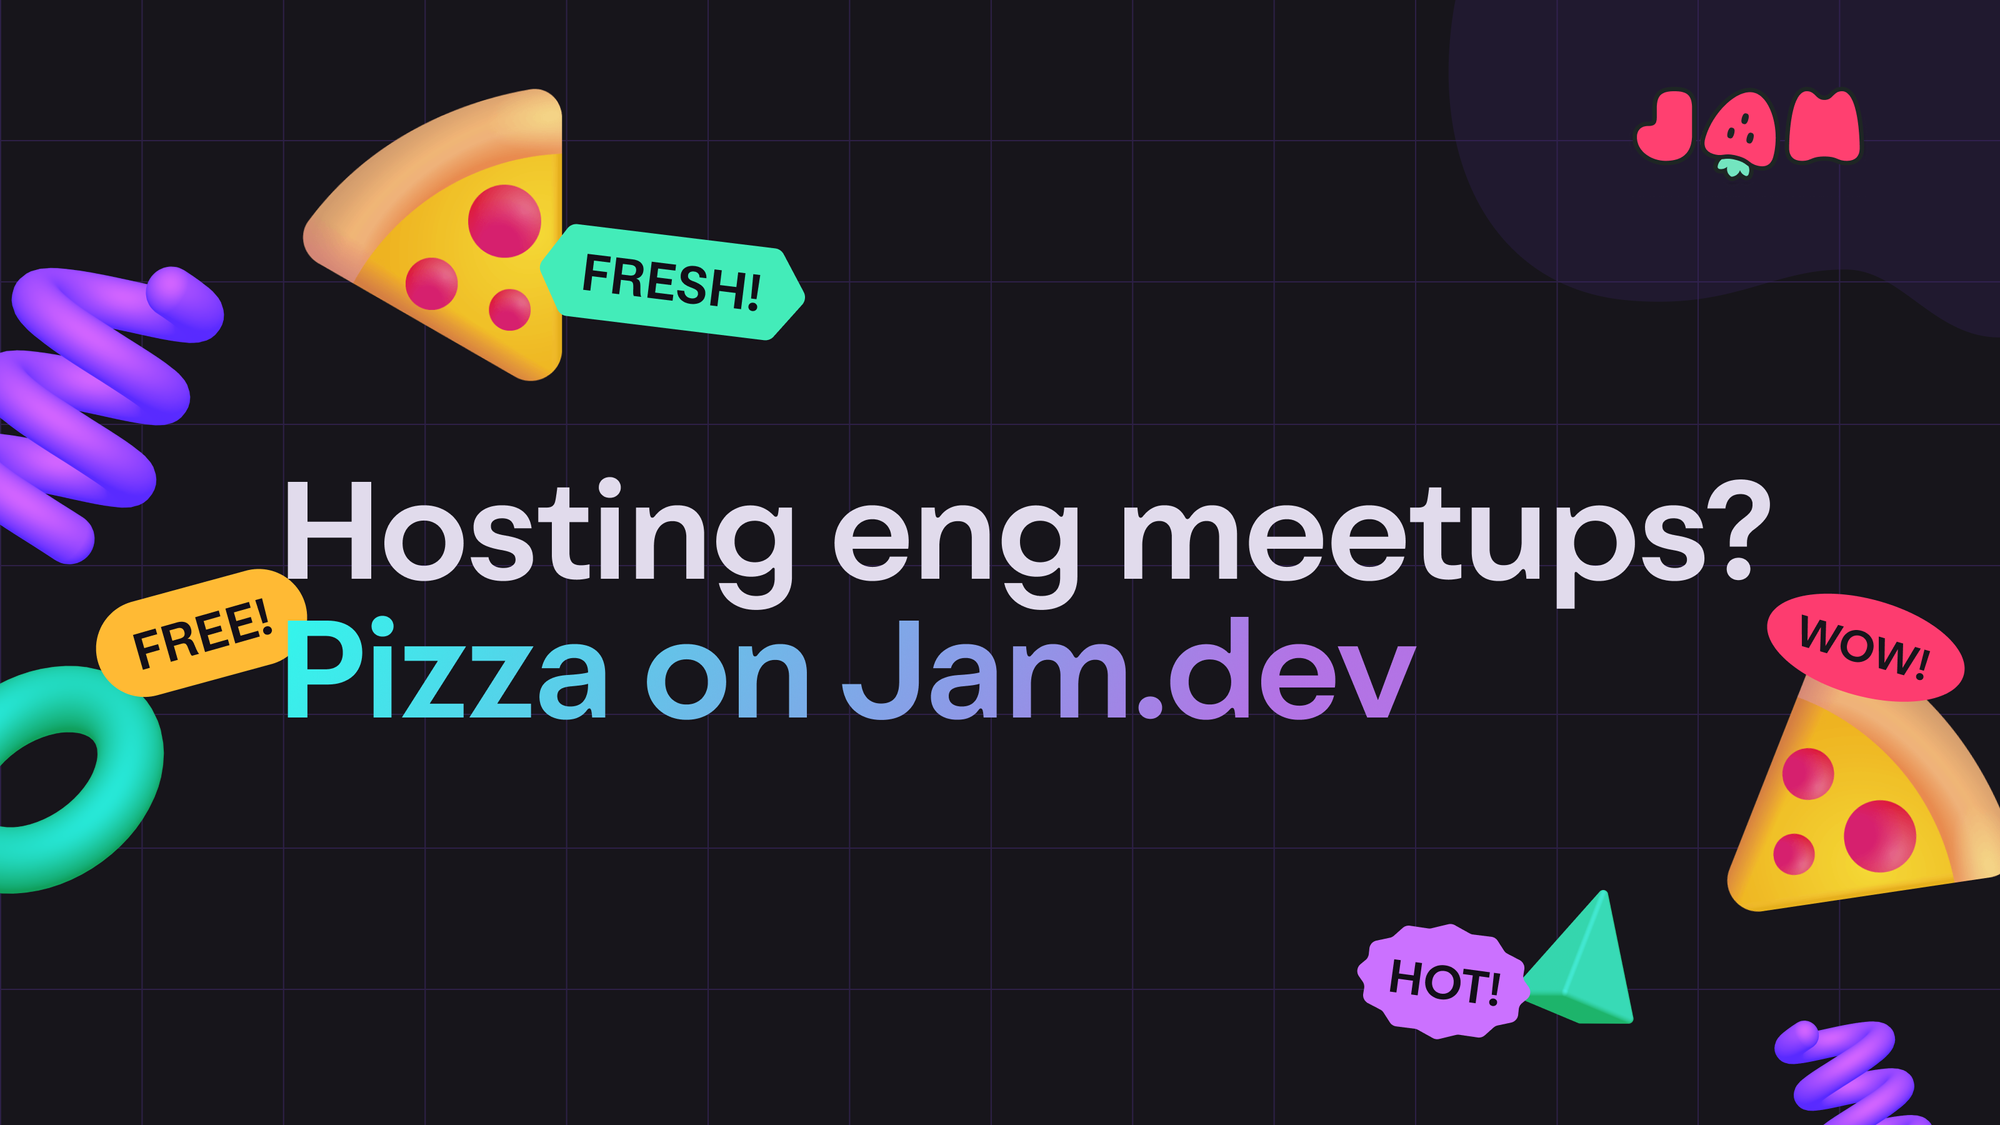 Hosting eng meetups? We’ll cover the pizza!